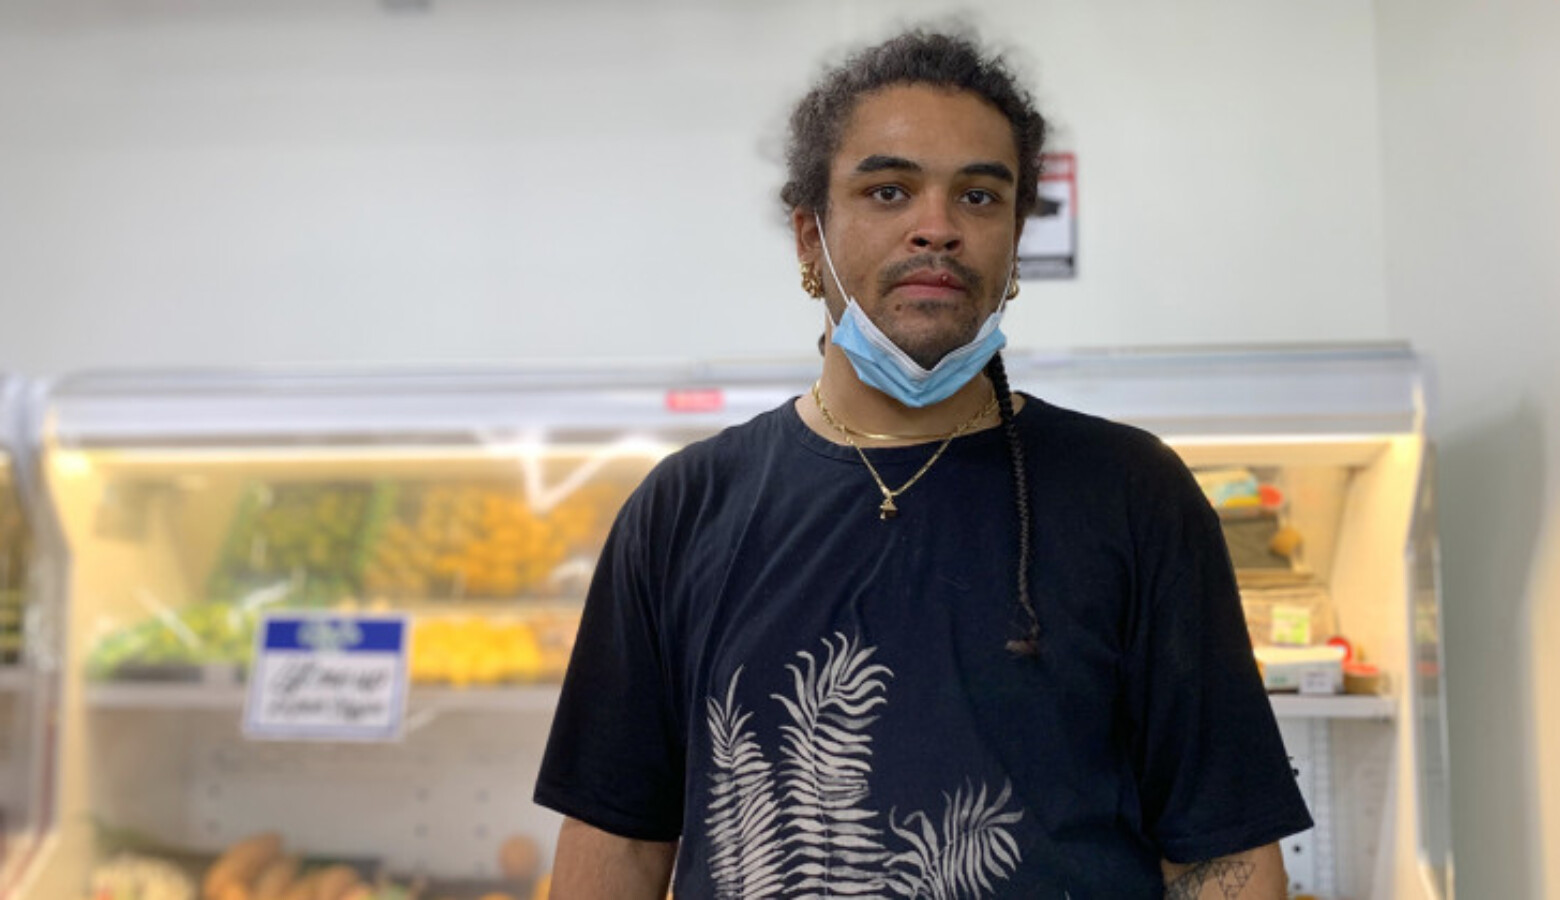 Torian Jones has severe asthma, so he wanted to stay home during the COVID-19 pandemic, but he couldn't afford to quit his grocery store job.